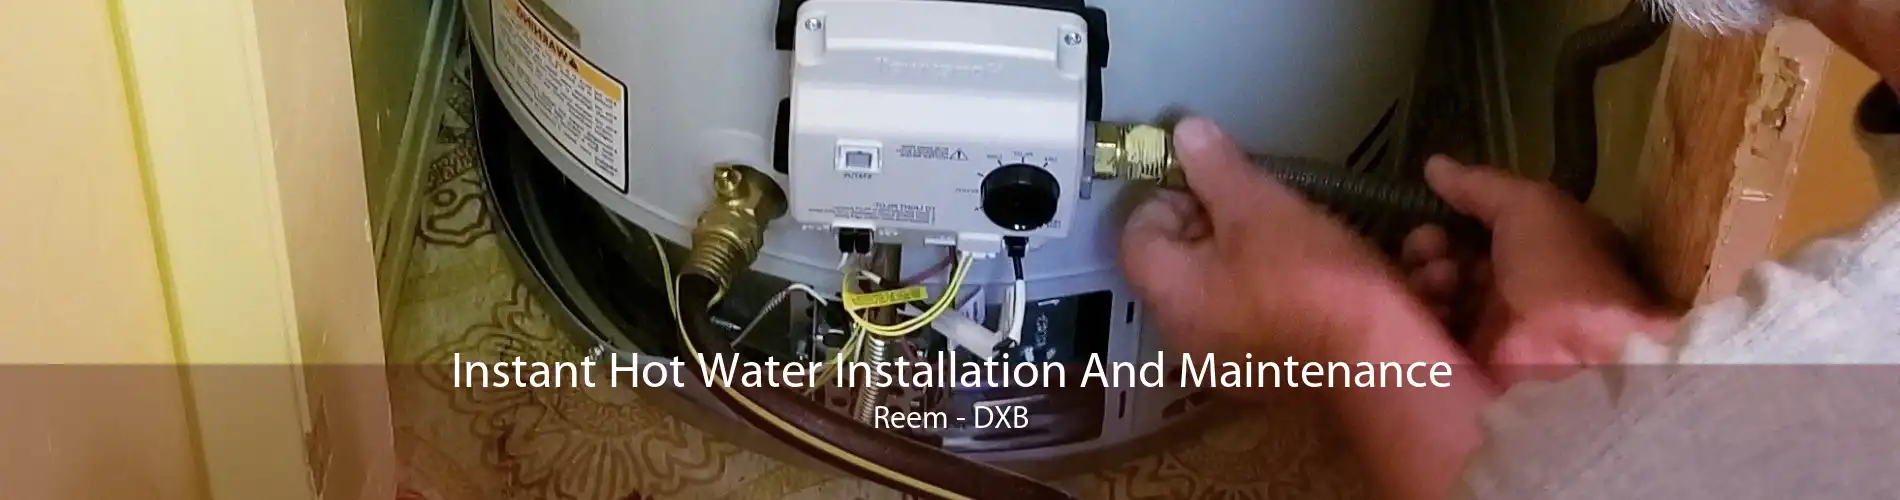 Instant Hot Water Installation And Maintenance Reem - DXB